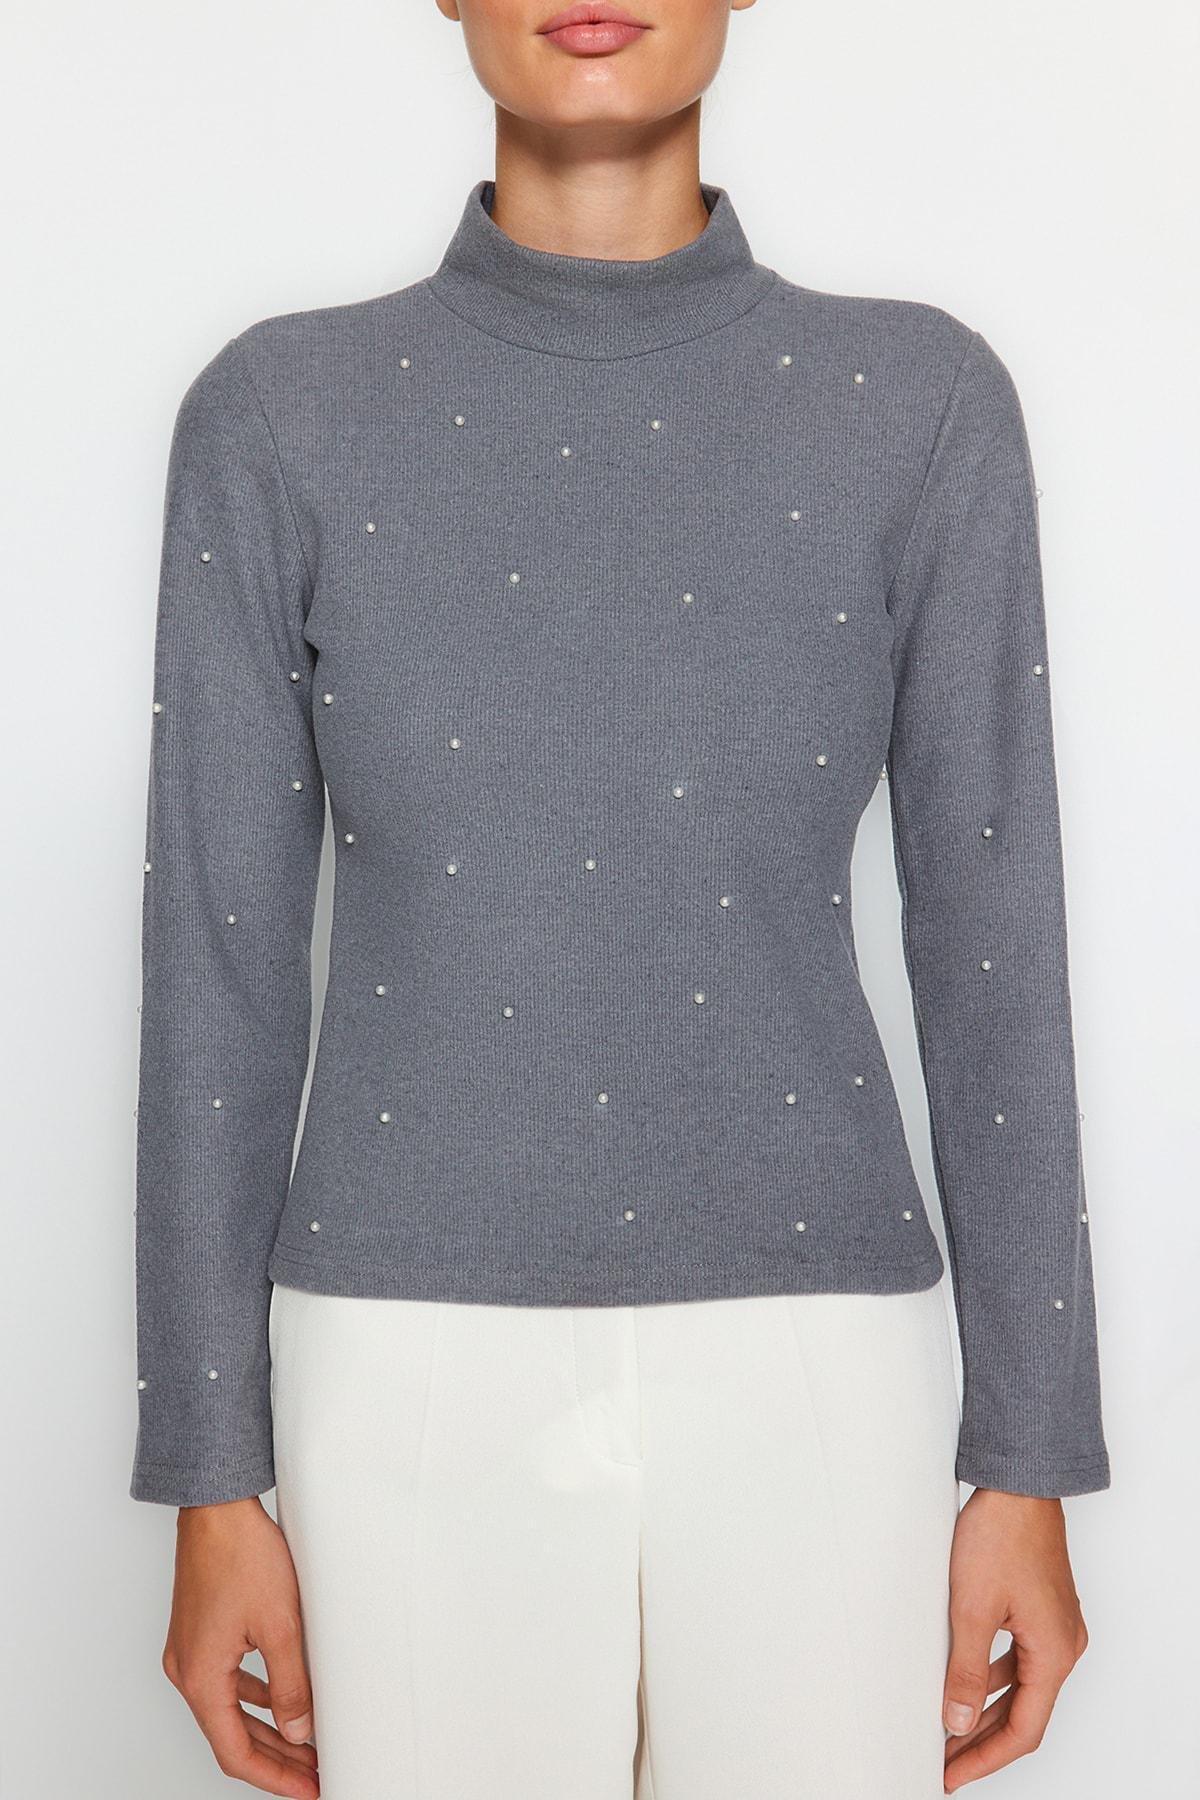 Trendyol - Grey Collared Pearl Knitted Blouse